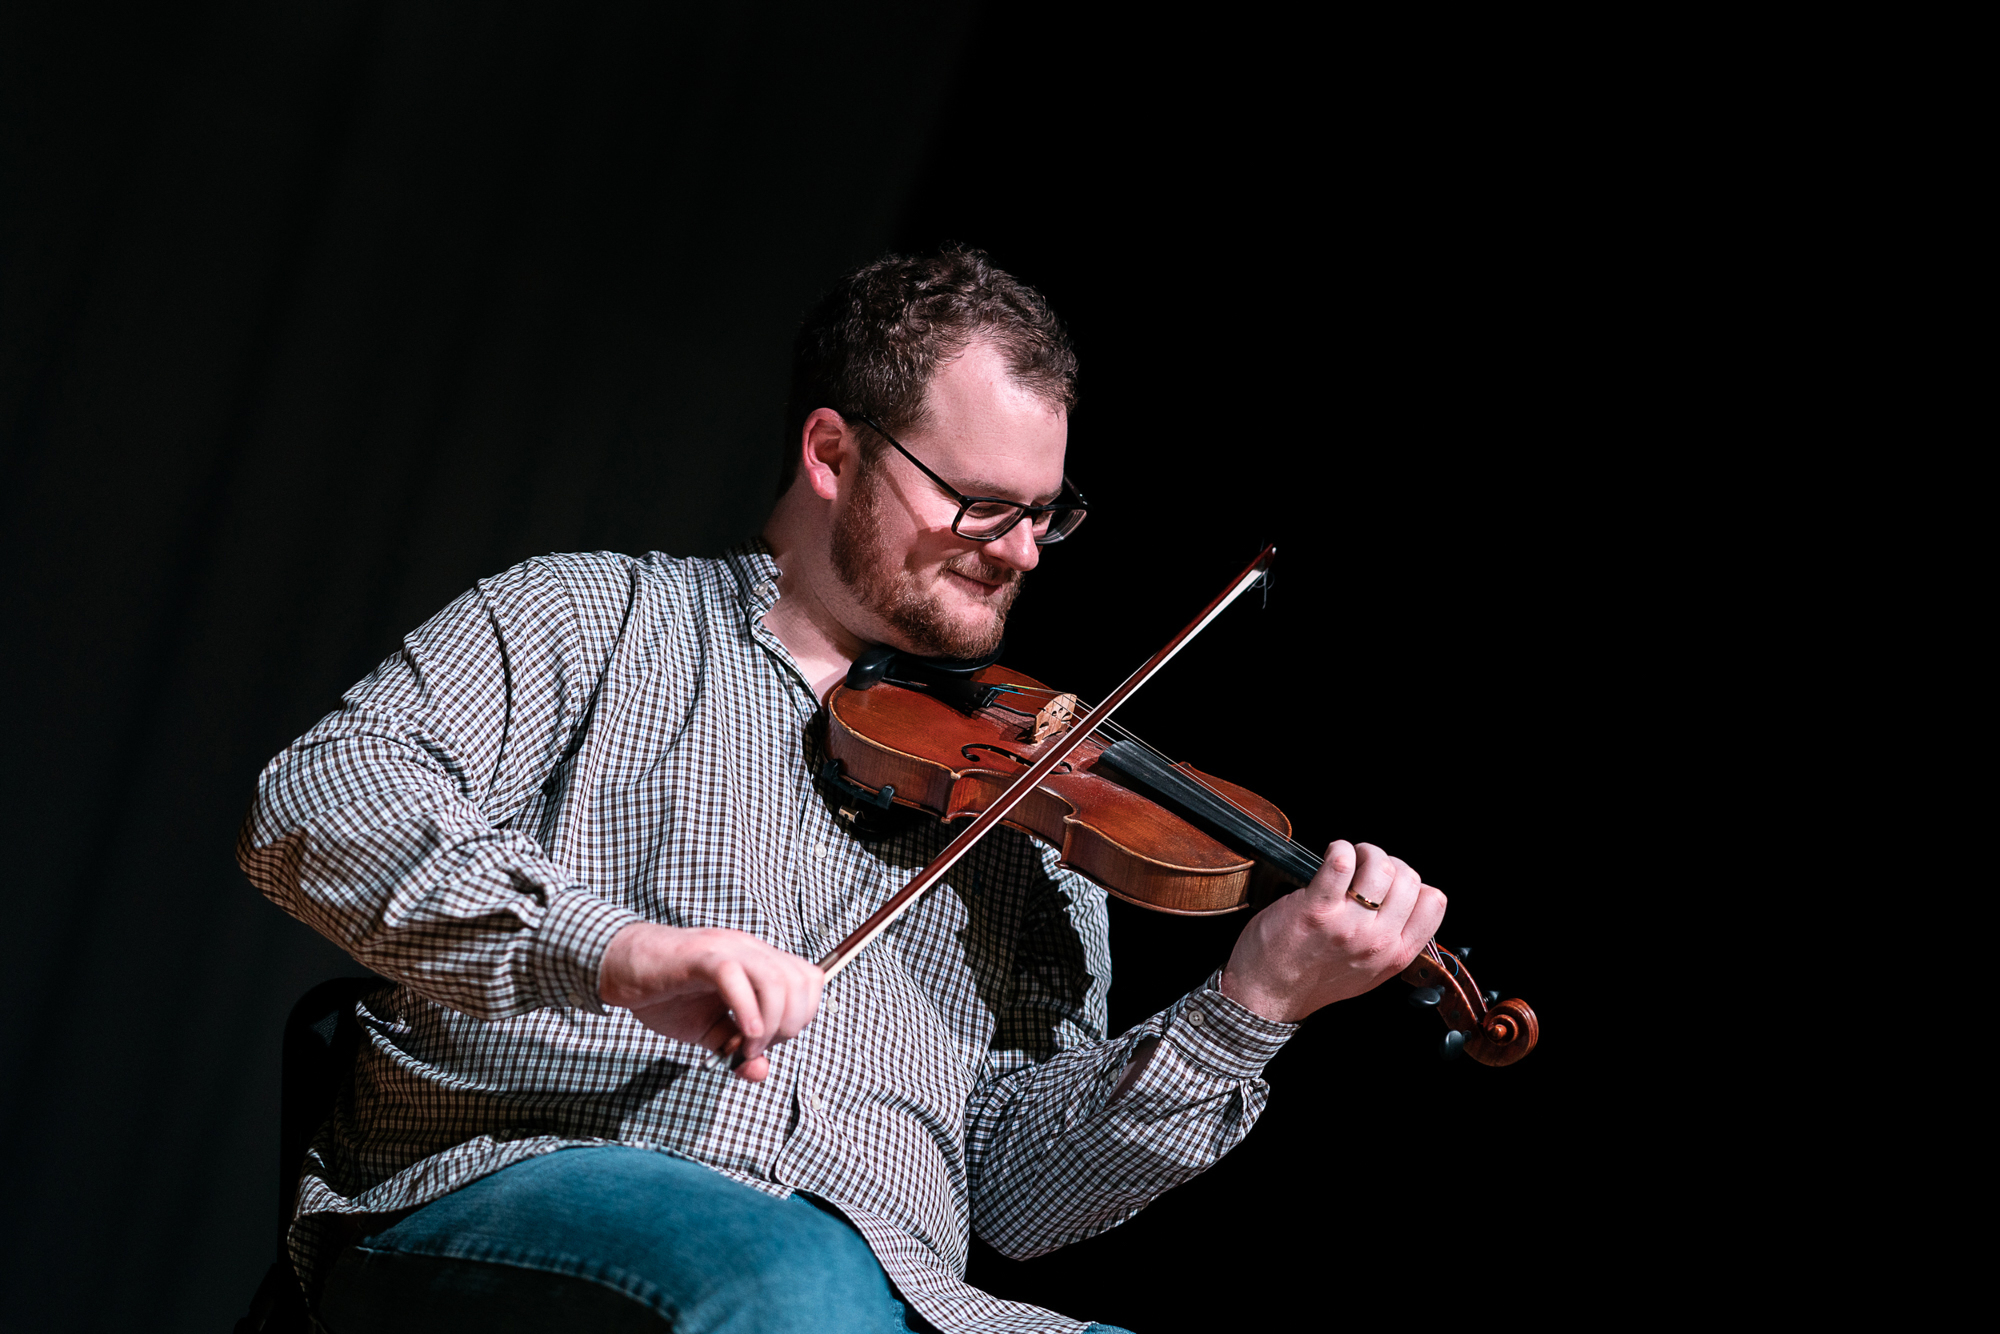 Dylan Foley is a four-time All Ireland fiddle champion. (Courtesy photo)